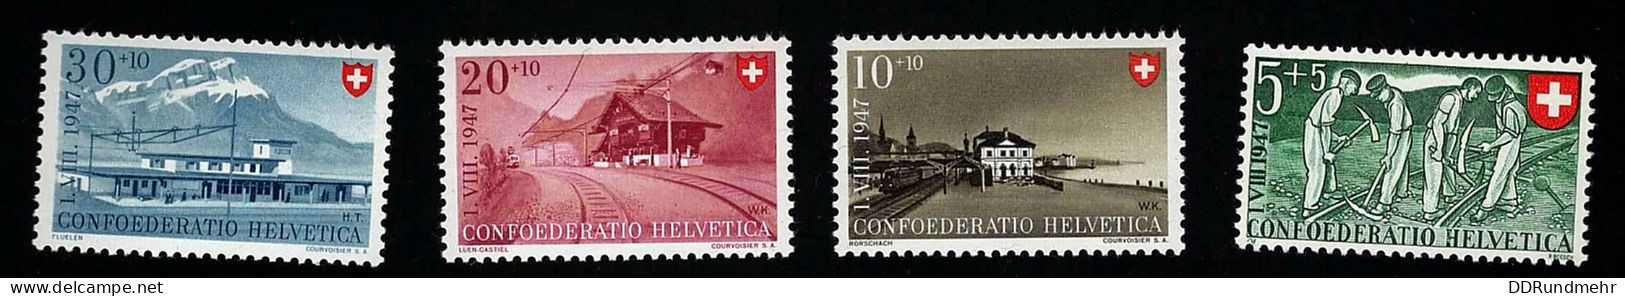 1947 Nationalfeier  Michel CH 480 - 483 Stamp Number CH B162 - B165 Yvert Et Tellier CH 437 - 440 Xx MNH - Unused Stamps